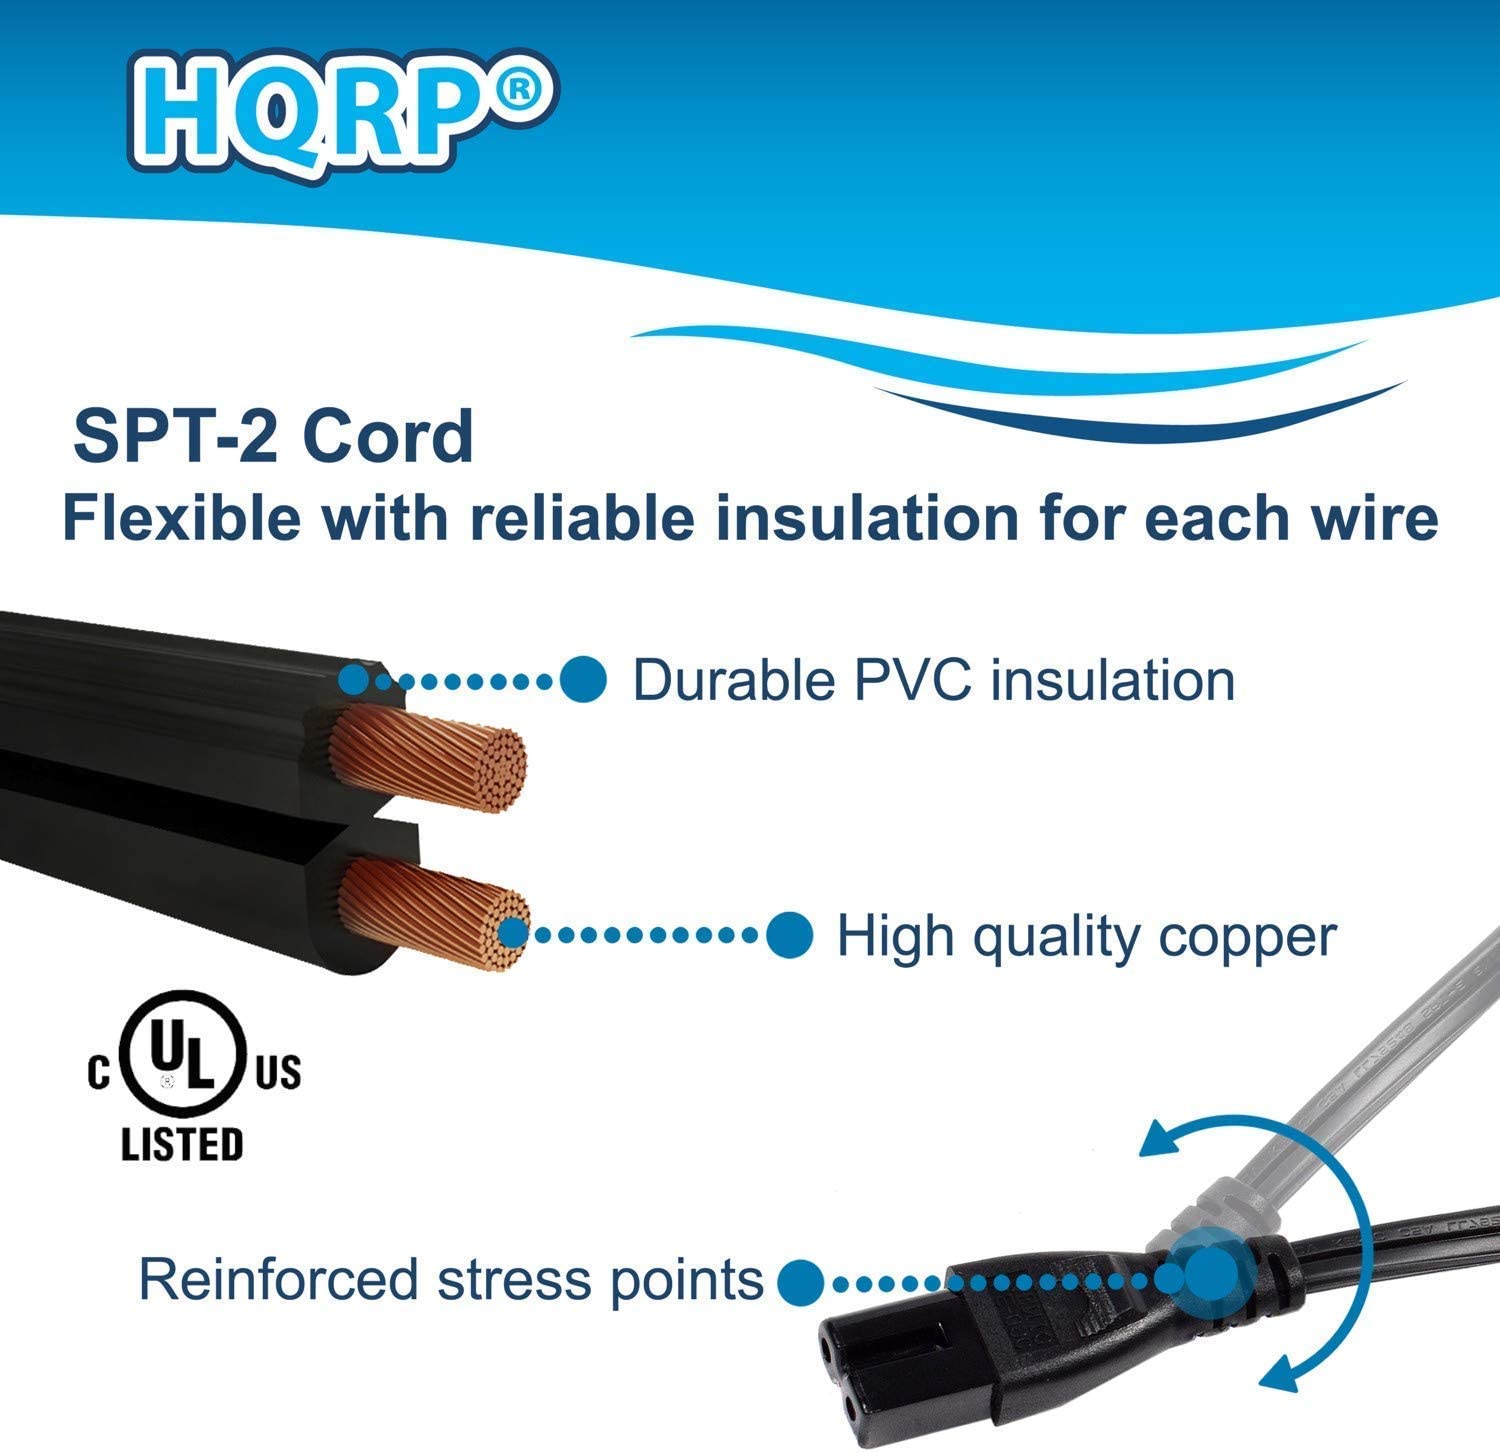 HQRP AC Power Cord works with COMPANION Stereo 3, 5 Speakers, Companion 3 Series II Multimedia Speaker System Mains Cable - image 4 of 7